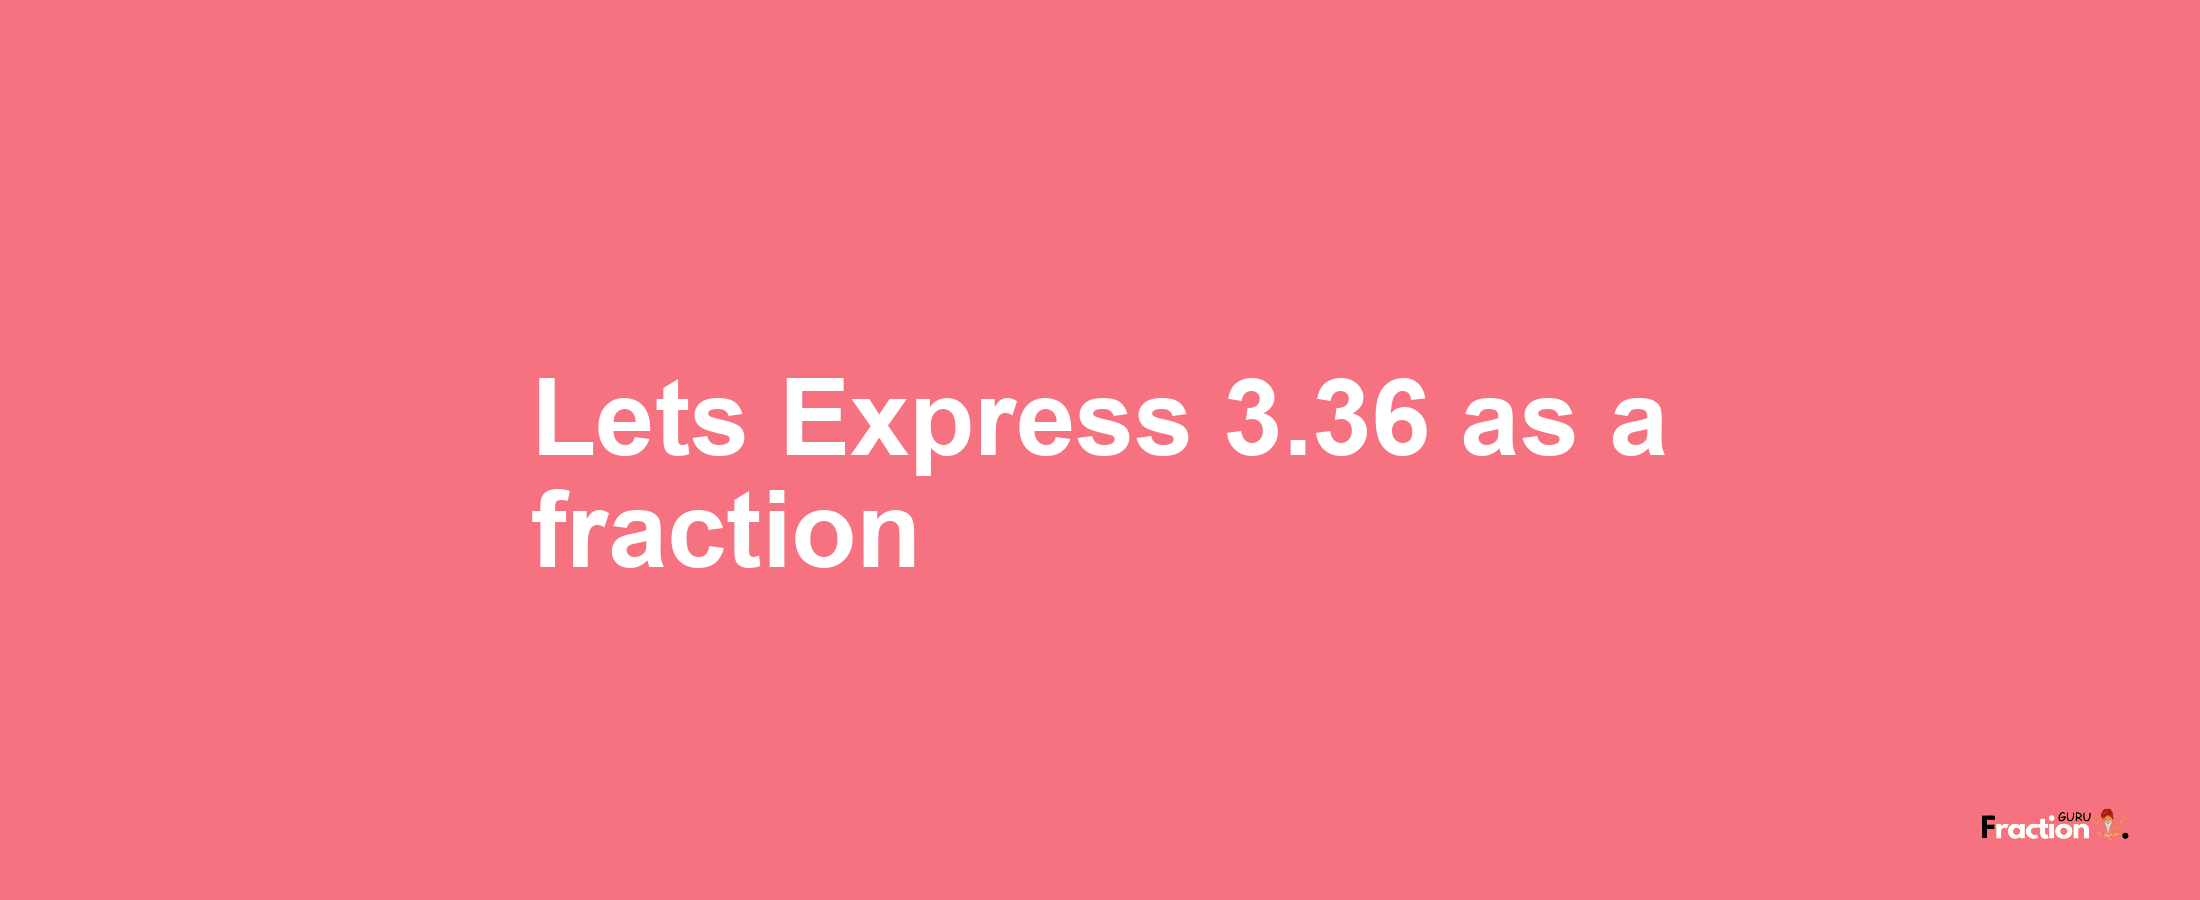 Lets Express 3.36 as afraction